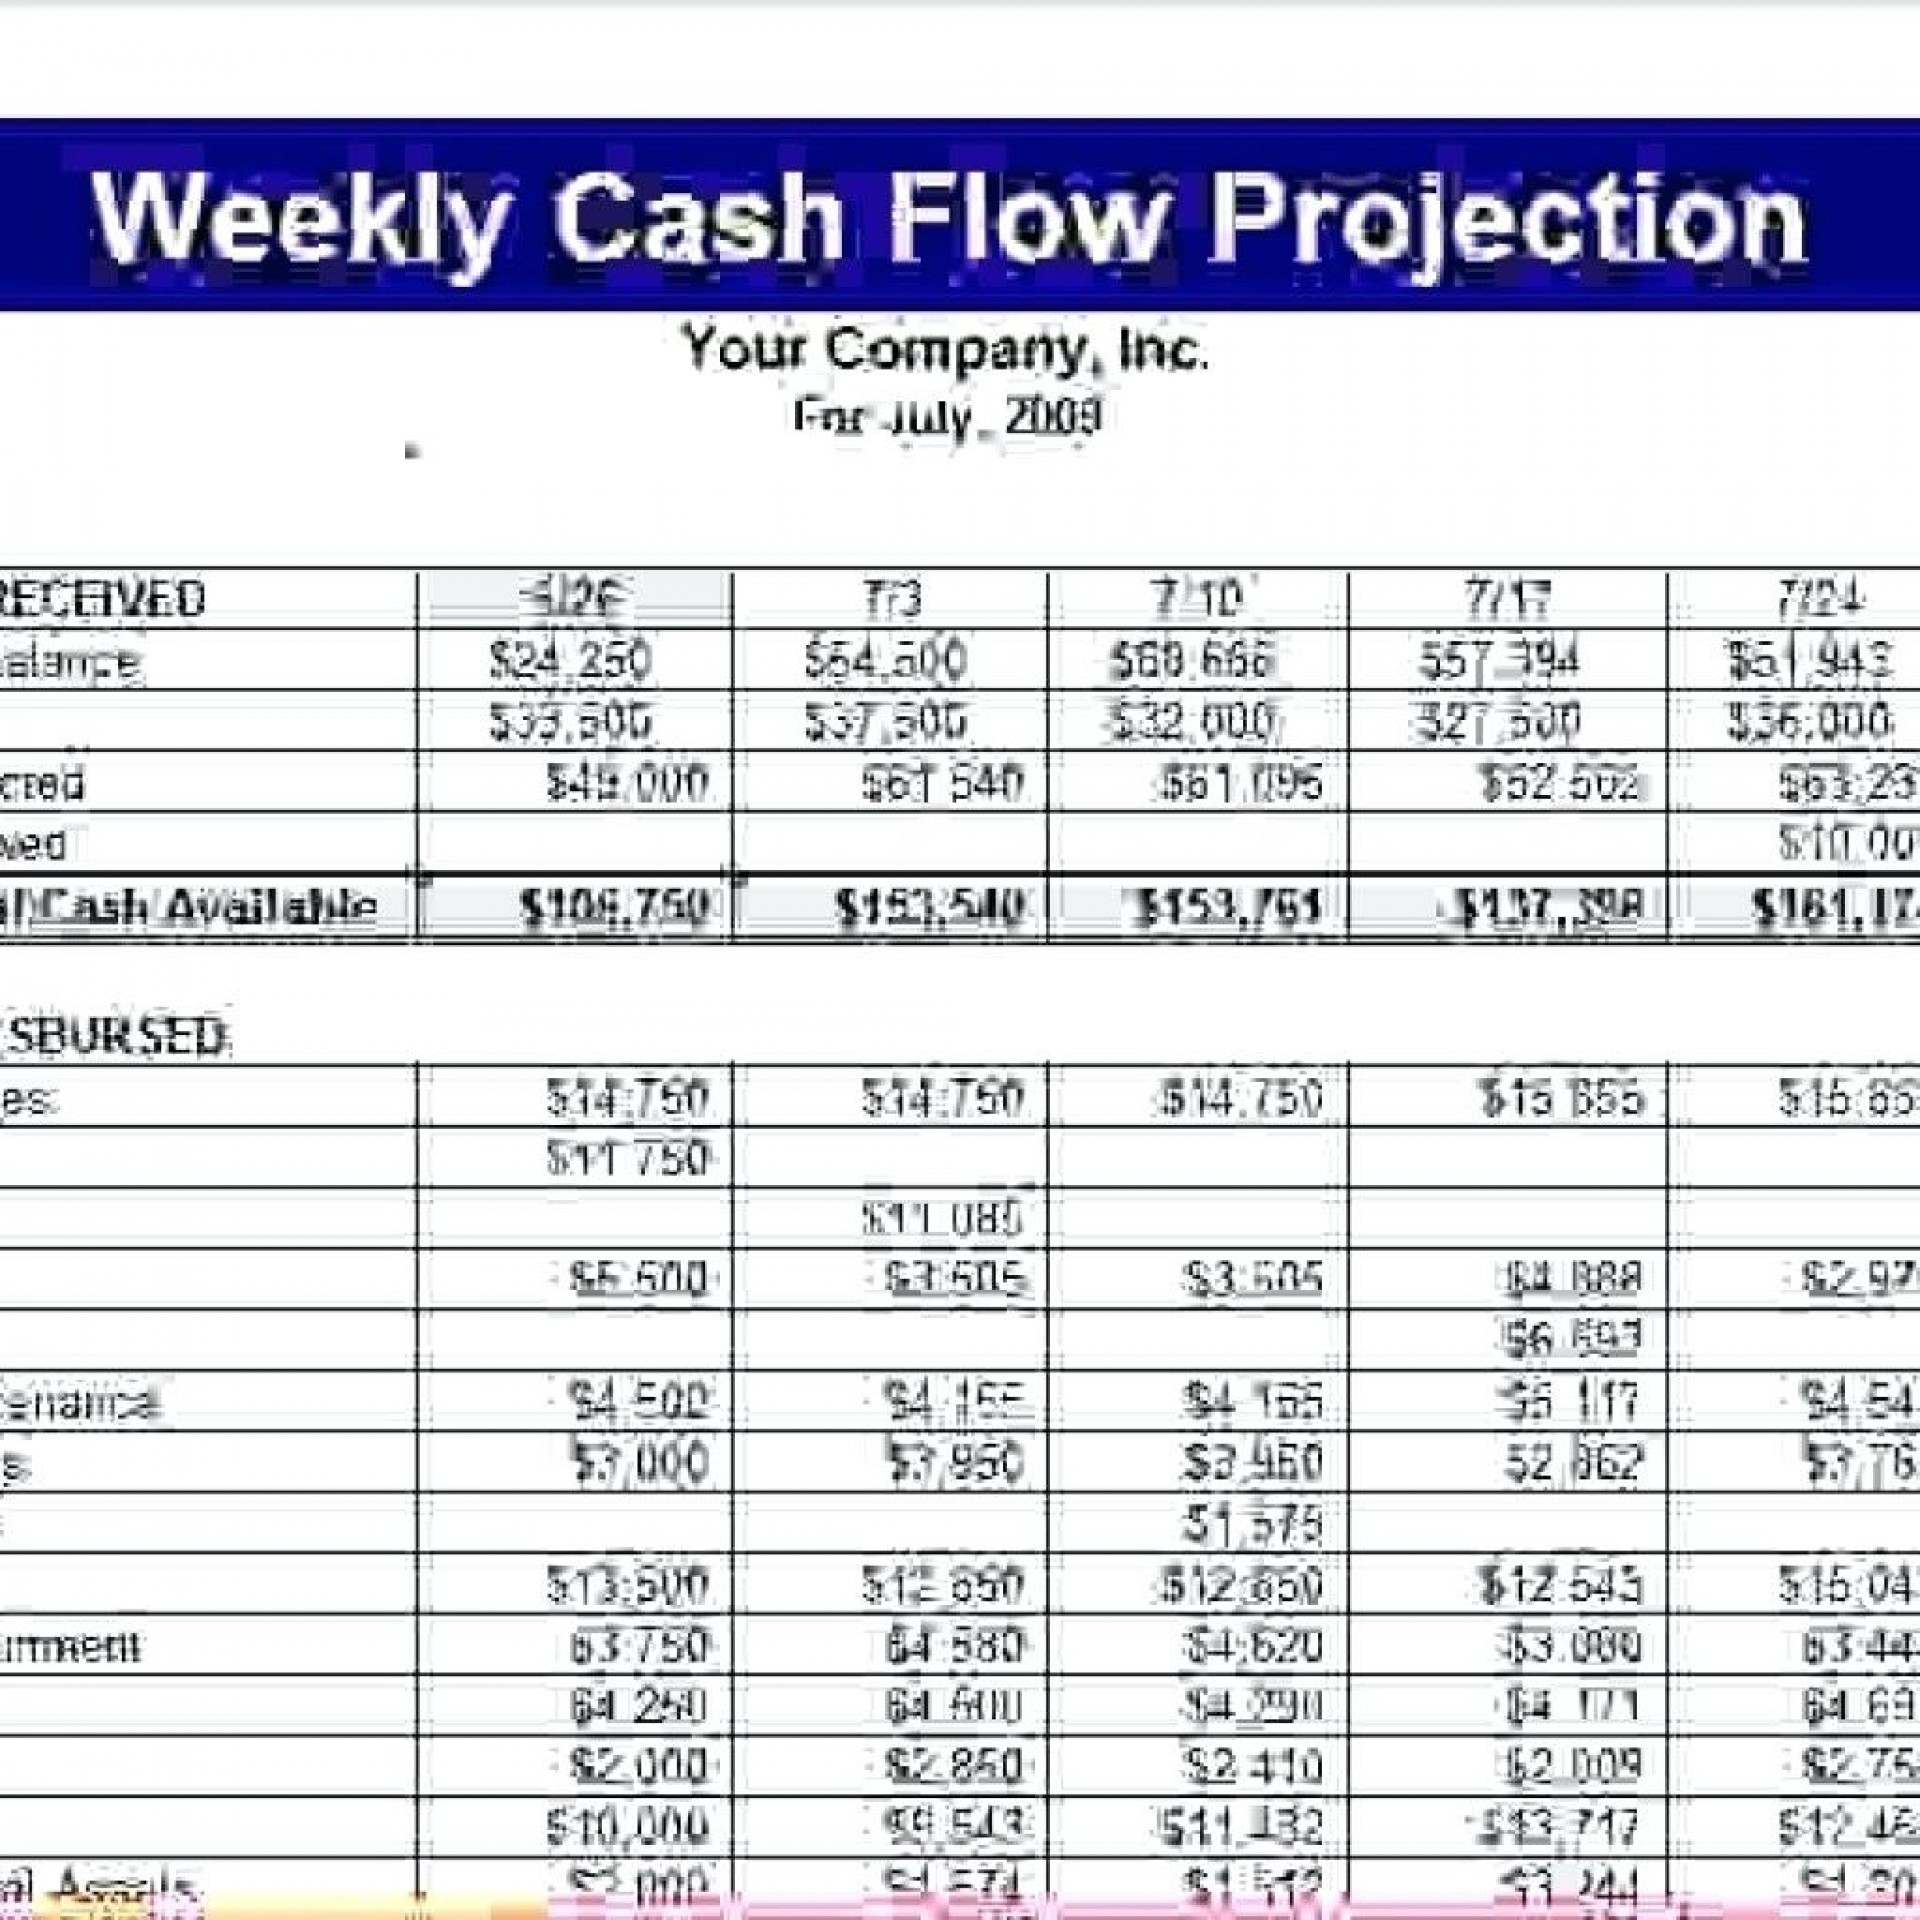 Cash Flow Projection Spreadsheet Template Pertaining To 008 Template Ideas Weekly Cash Flow Projection Excel And Month